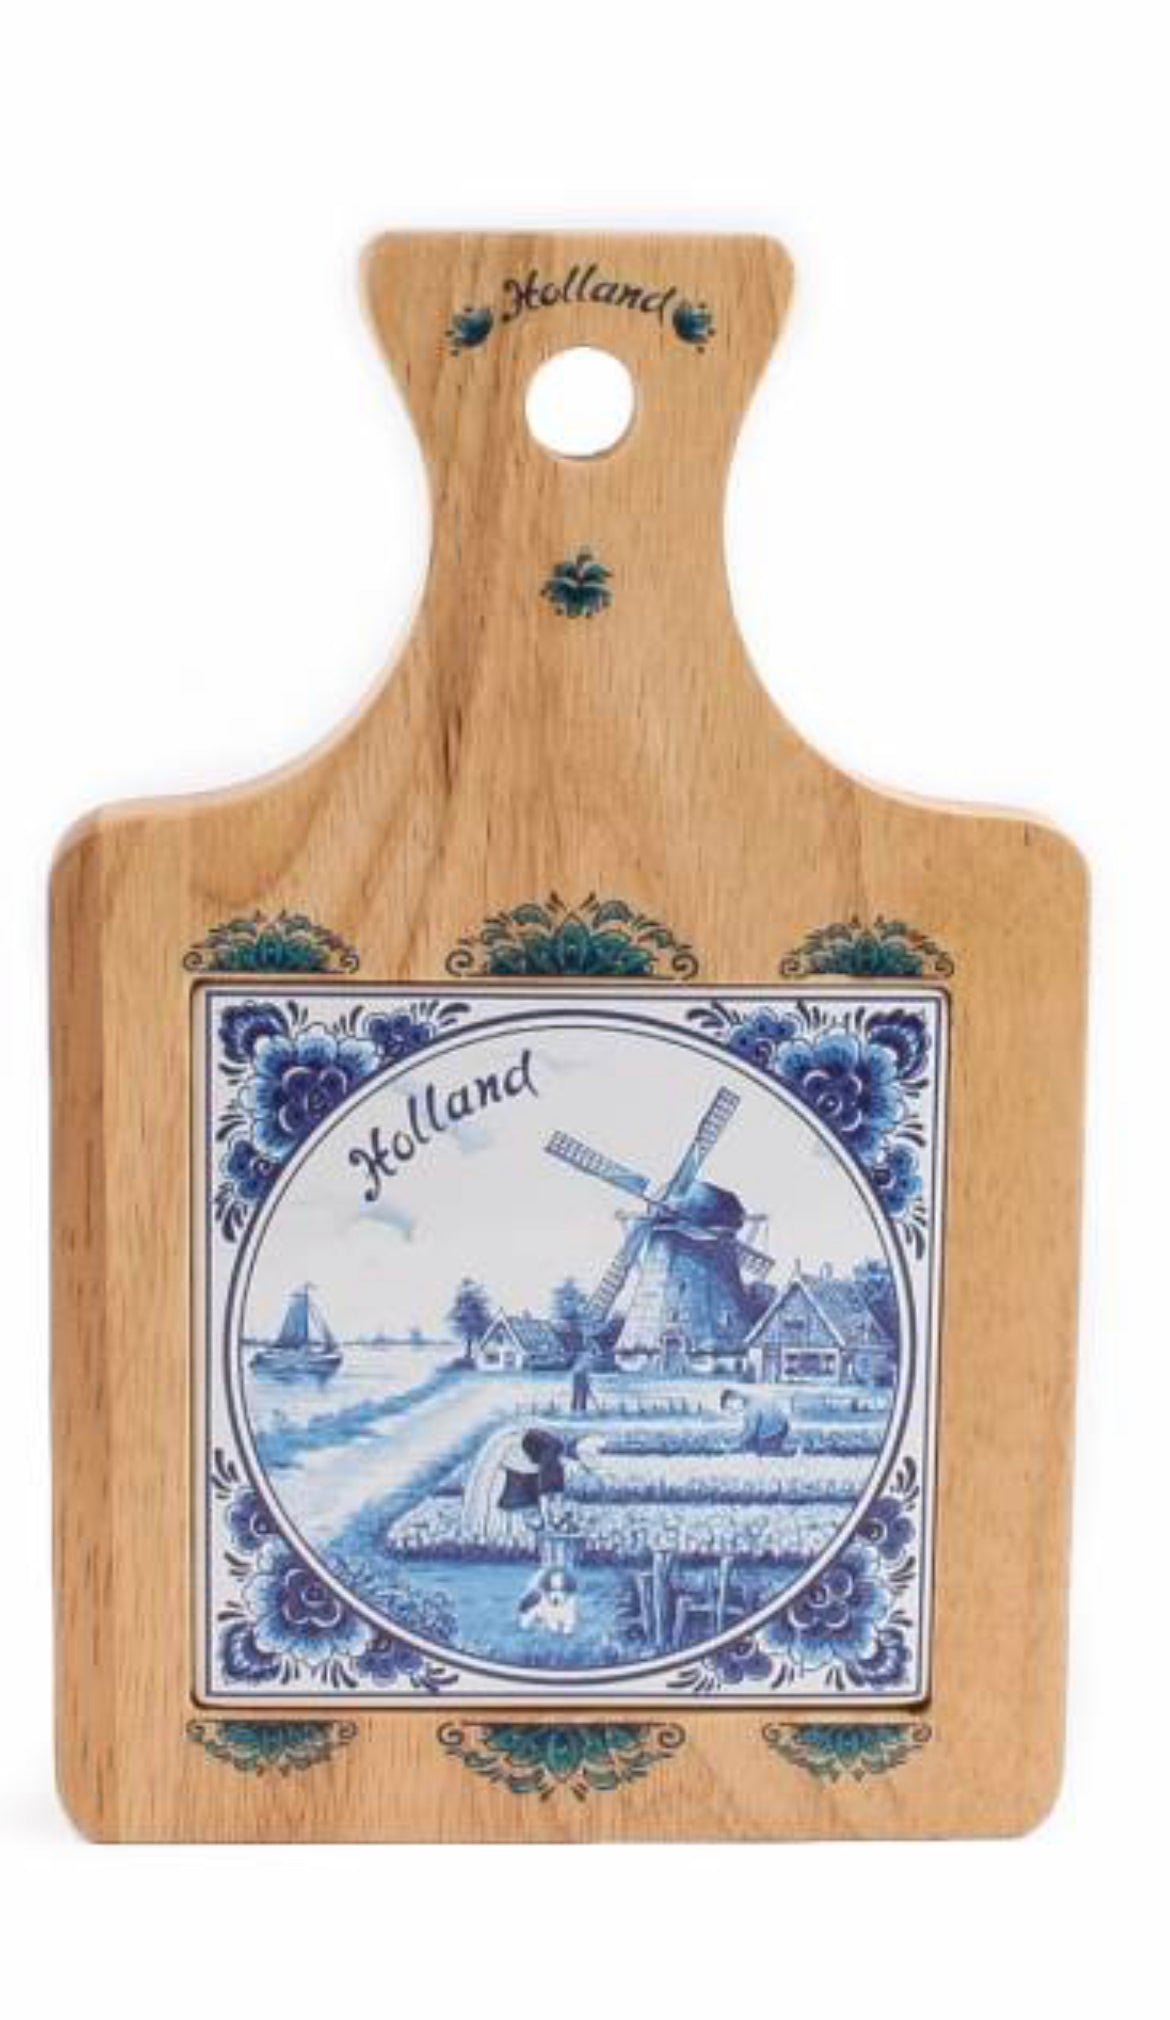 Cheese cutting board wood/Delft tile